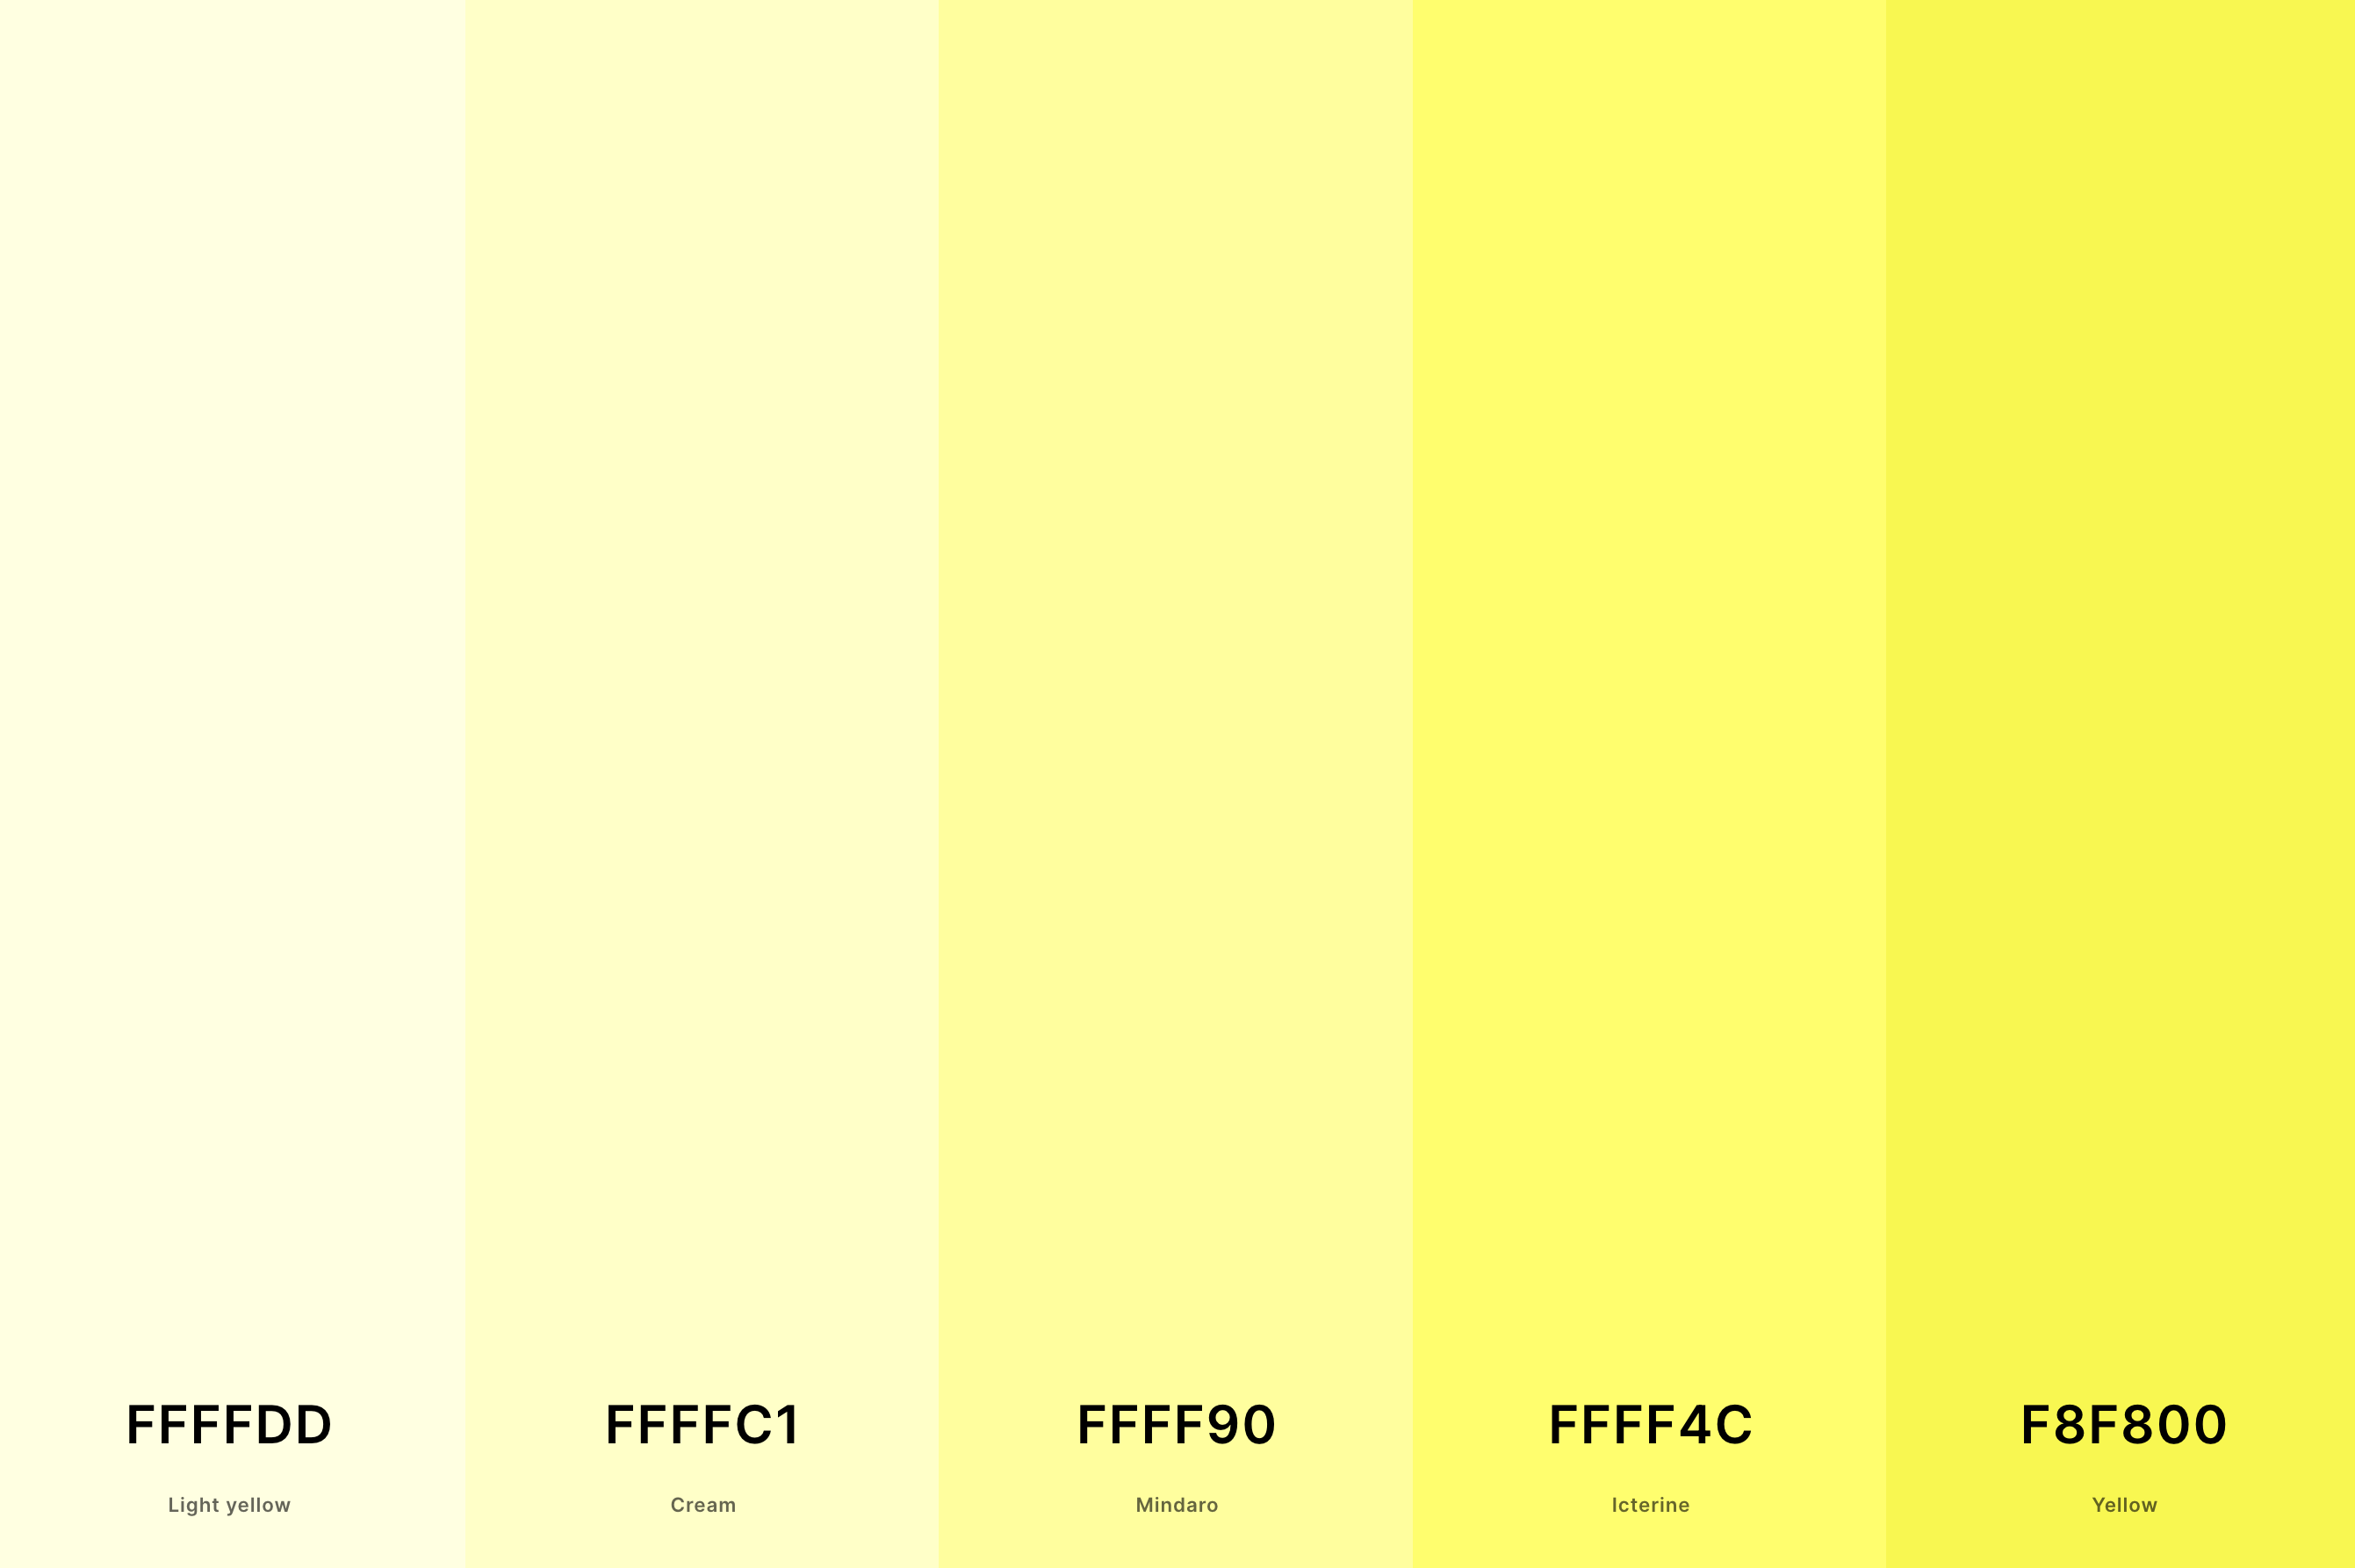 11. Light Yellow Color Palette Color Palette with Light Yellow (Hex #FFFFDD) + Cream (Hex #FFFFC1) + Mindaro (Hex #FFFF90) + Icterine (Hex #FFFF4C) + Yellow (Hex #F8F800) Color Palette with Hex Codes